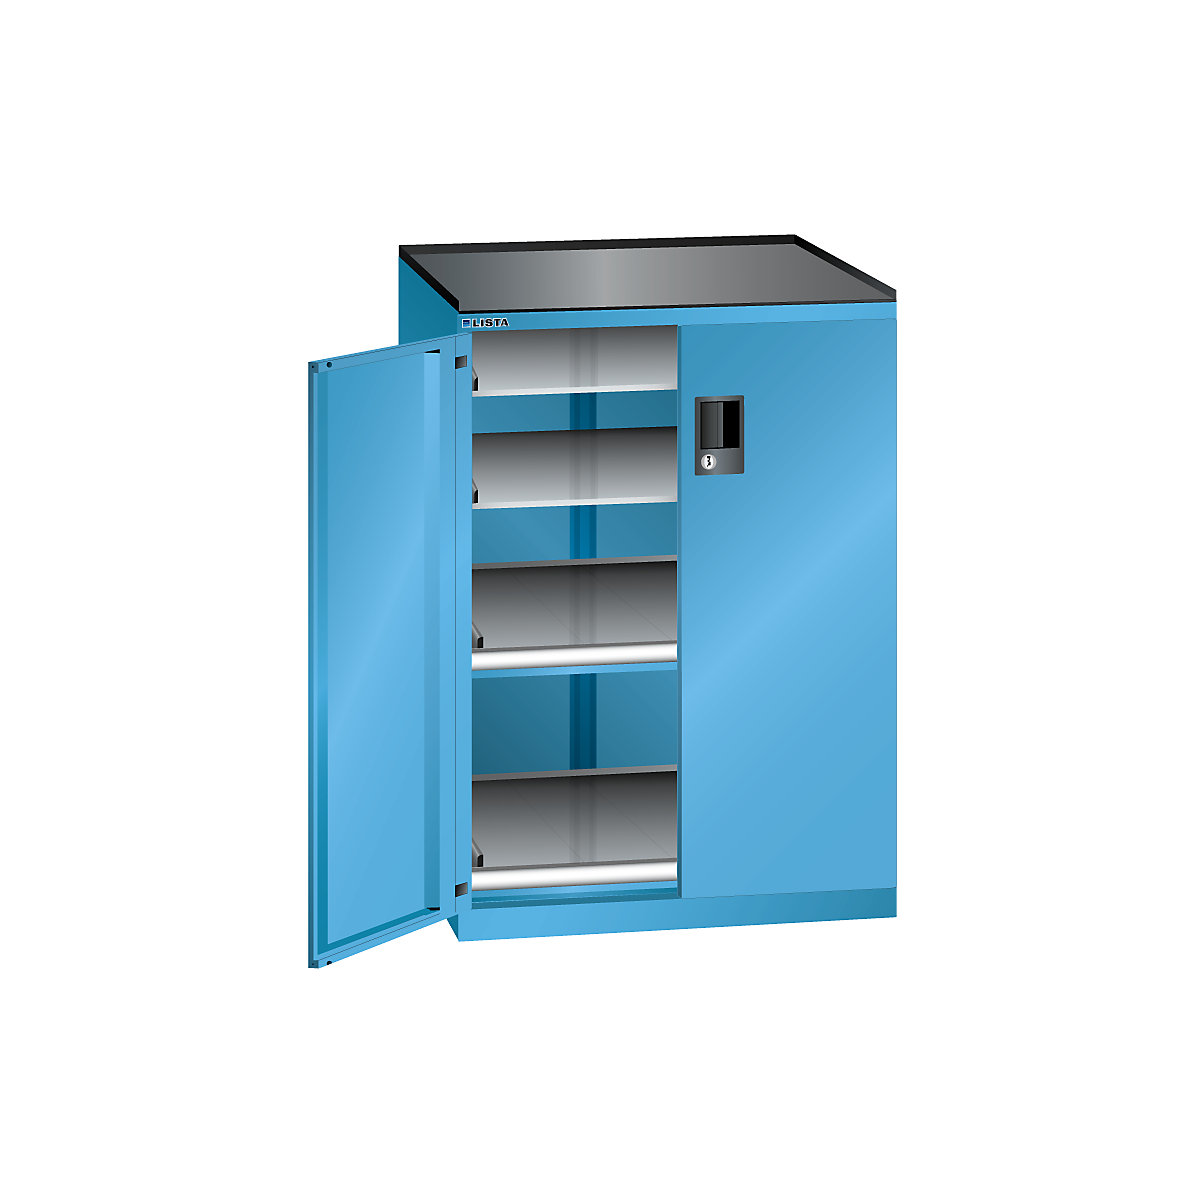 Drawer cupboard with hinged doors – LISTA, height 1020 mm, 4 shelves, max. load 75 kg, light blue-4